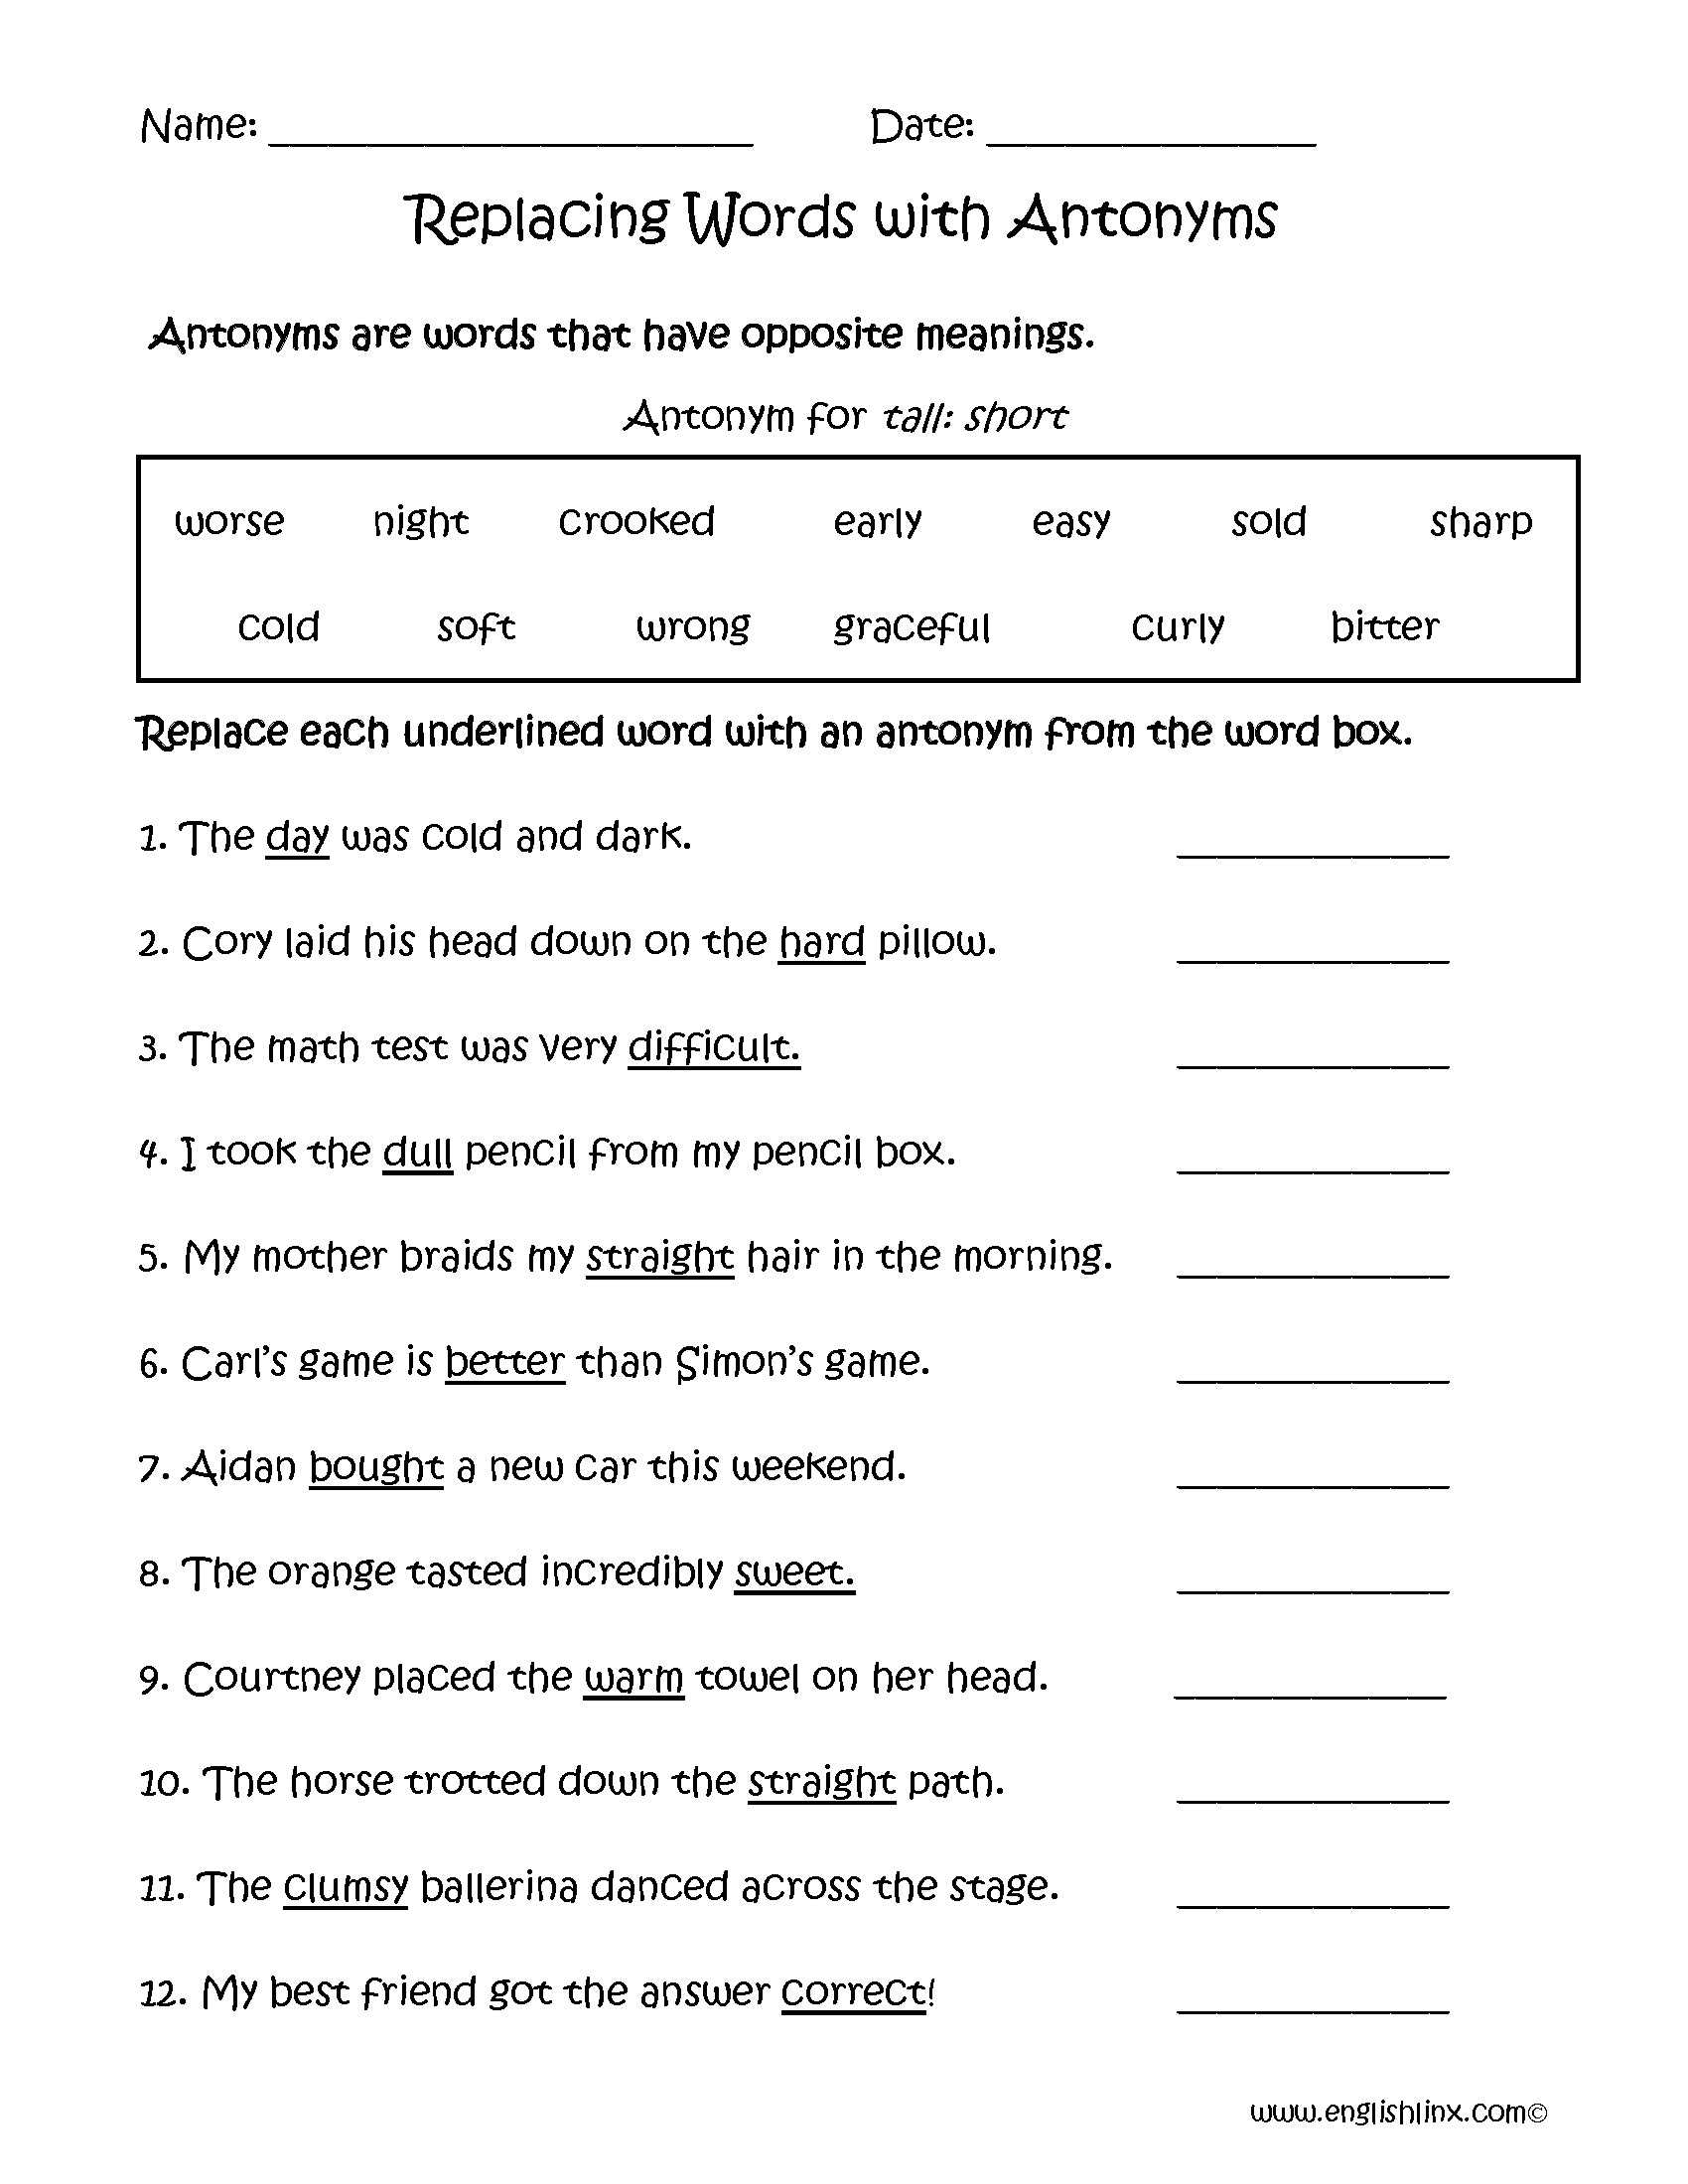 Adjectives Worksheet 3 Spanish Answers or School events Worksheet New Replacing Words with Antonyms Worksheets